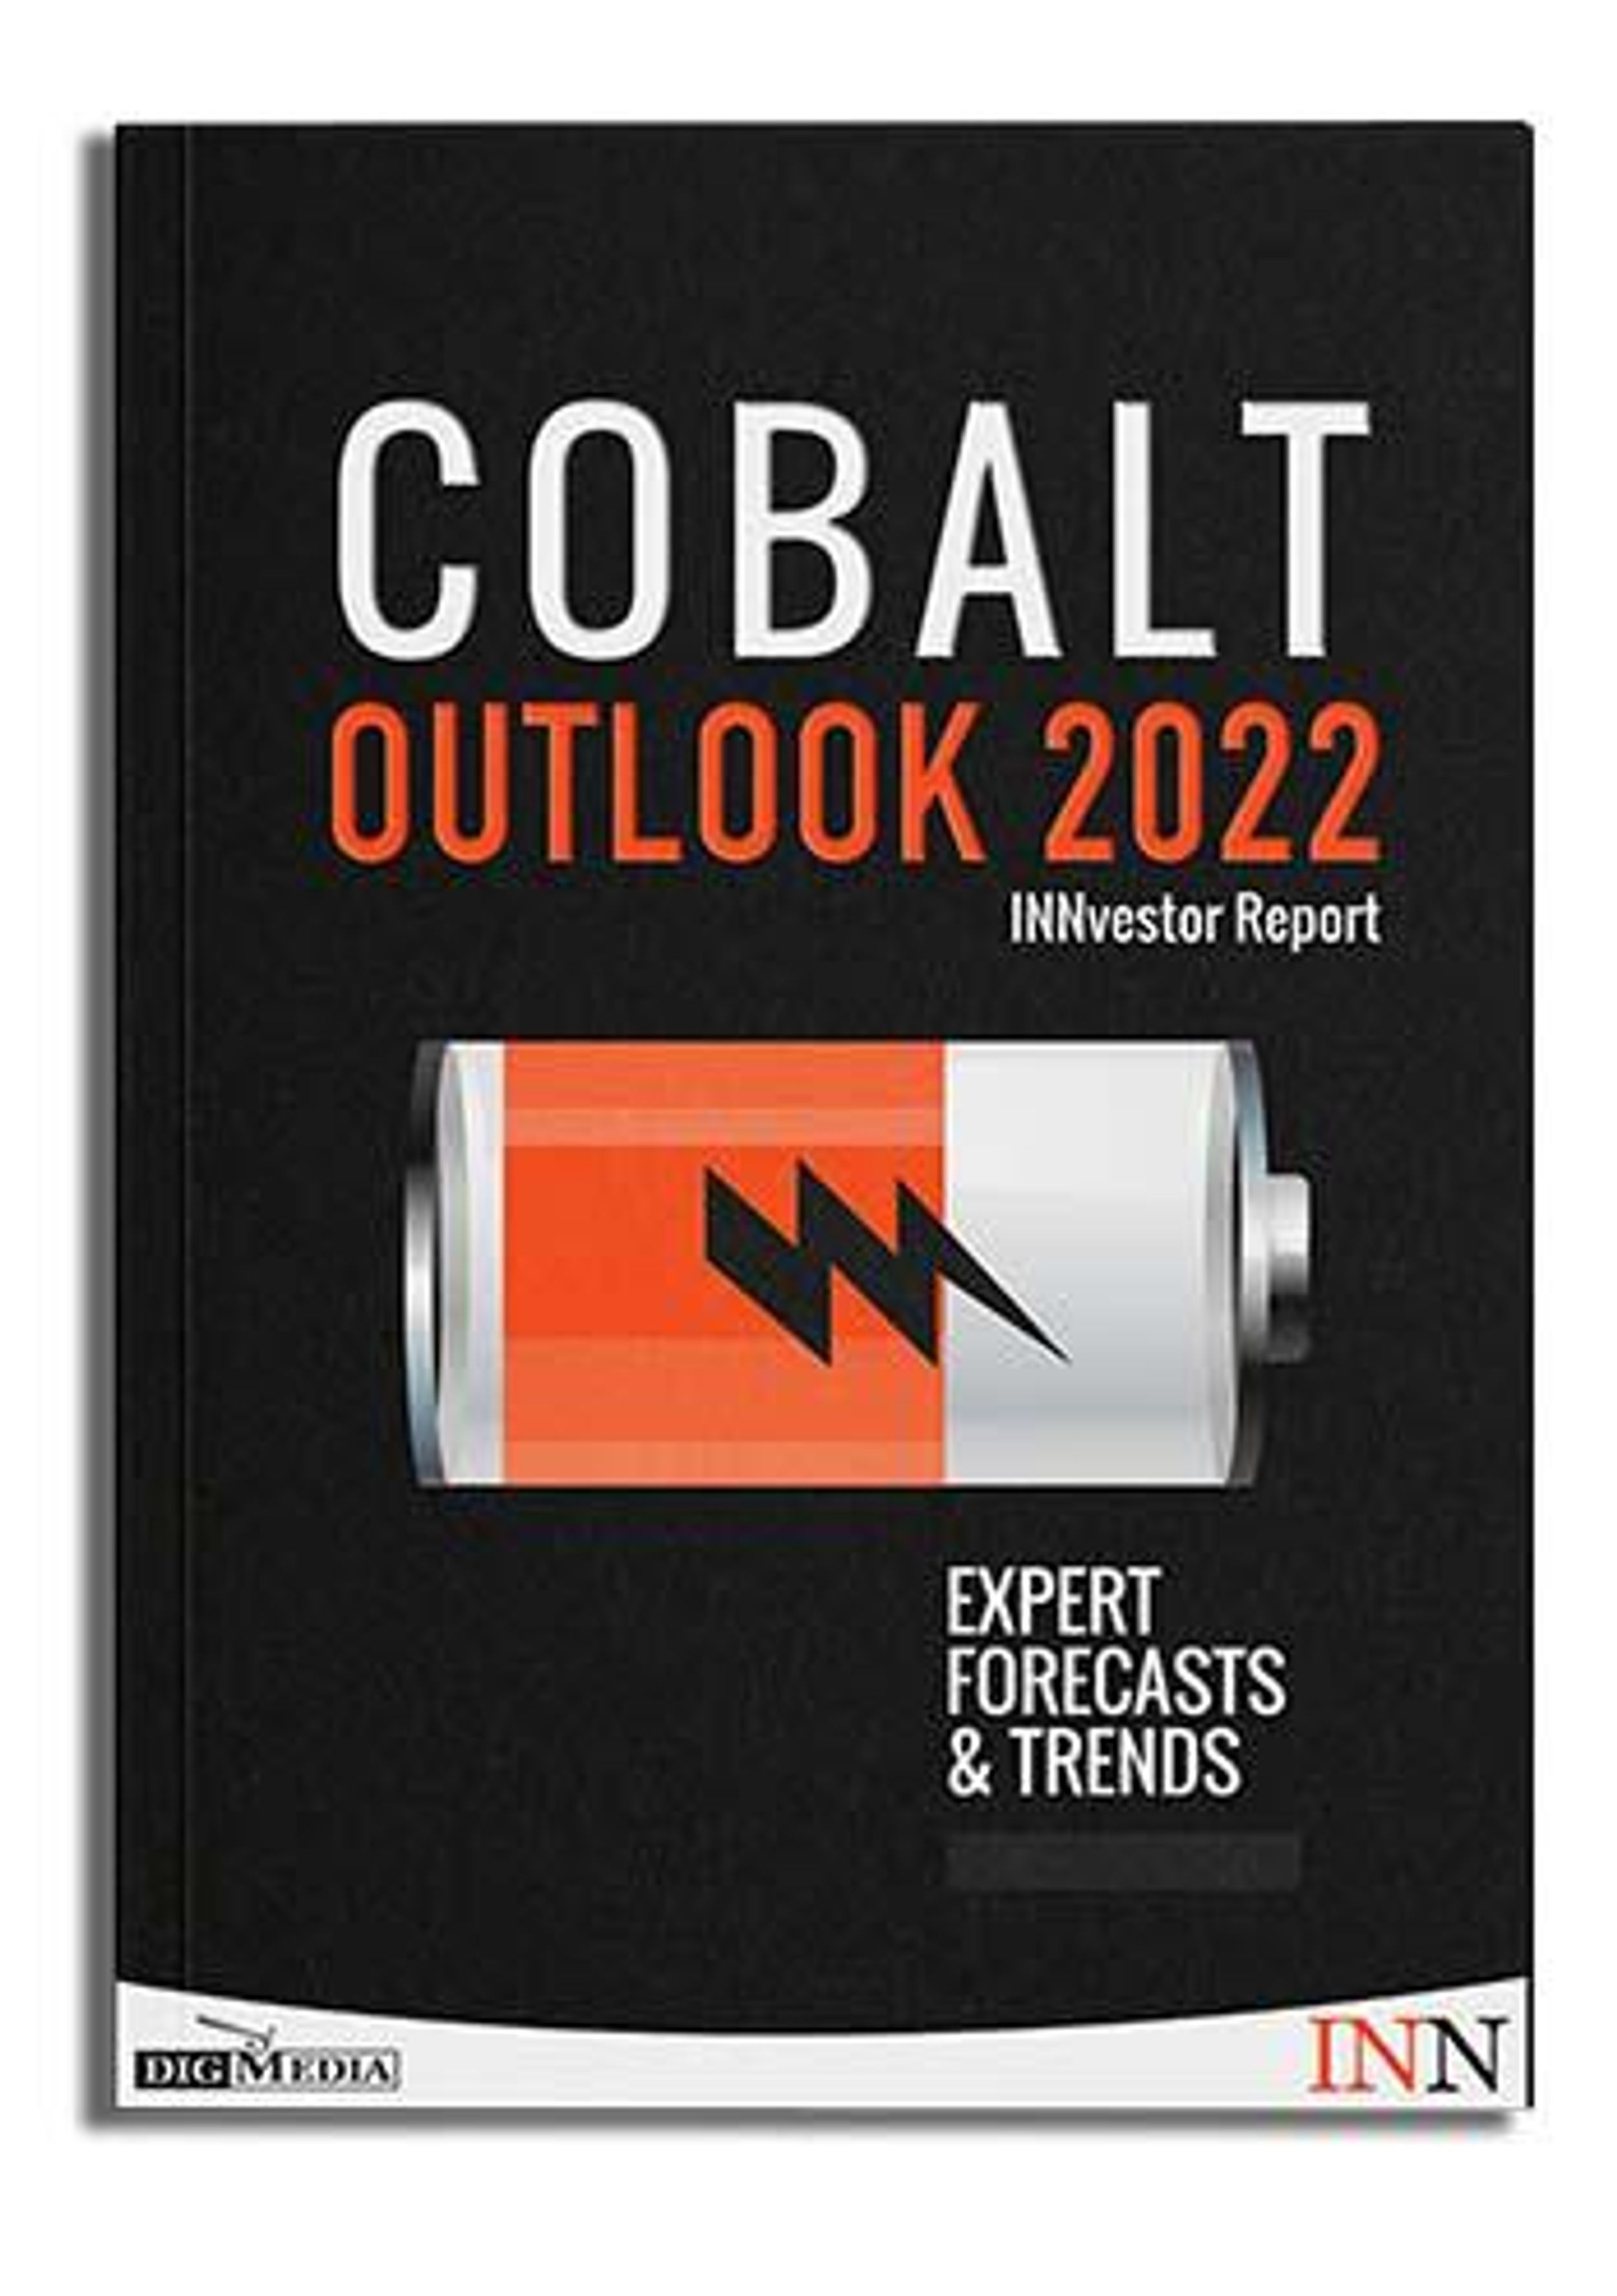 NEW! Download Our FREE 2022 Cobalt Outlook Report